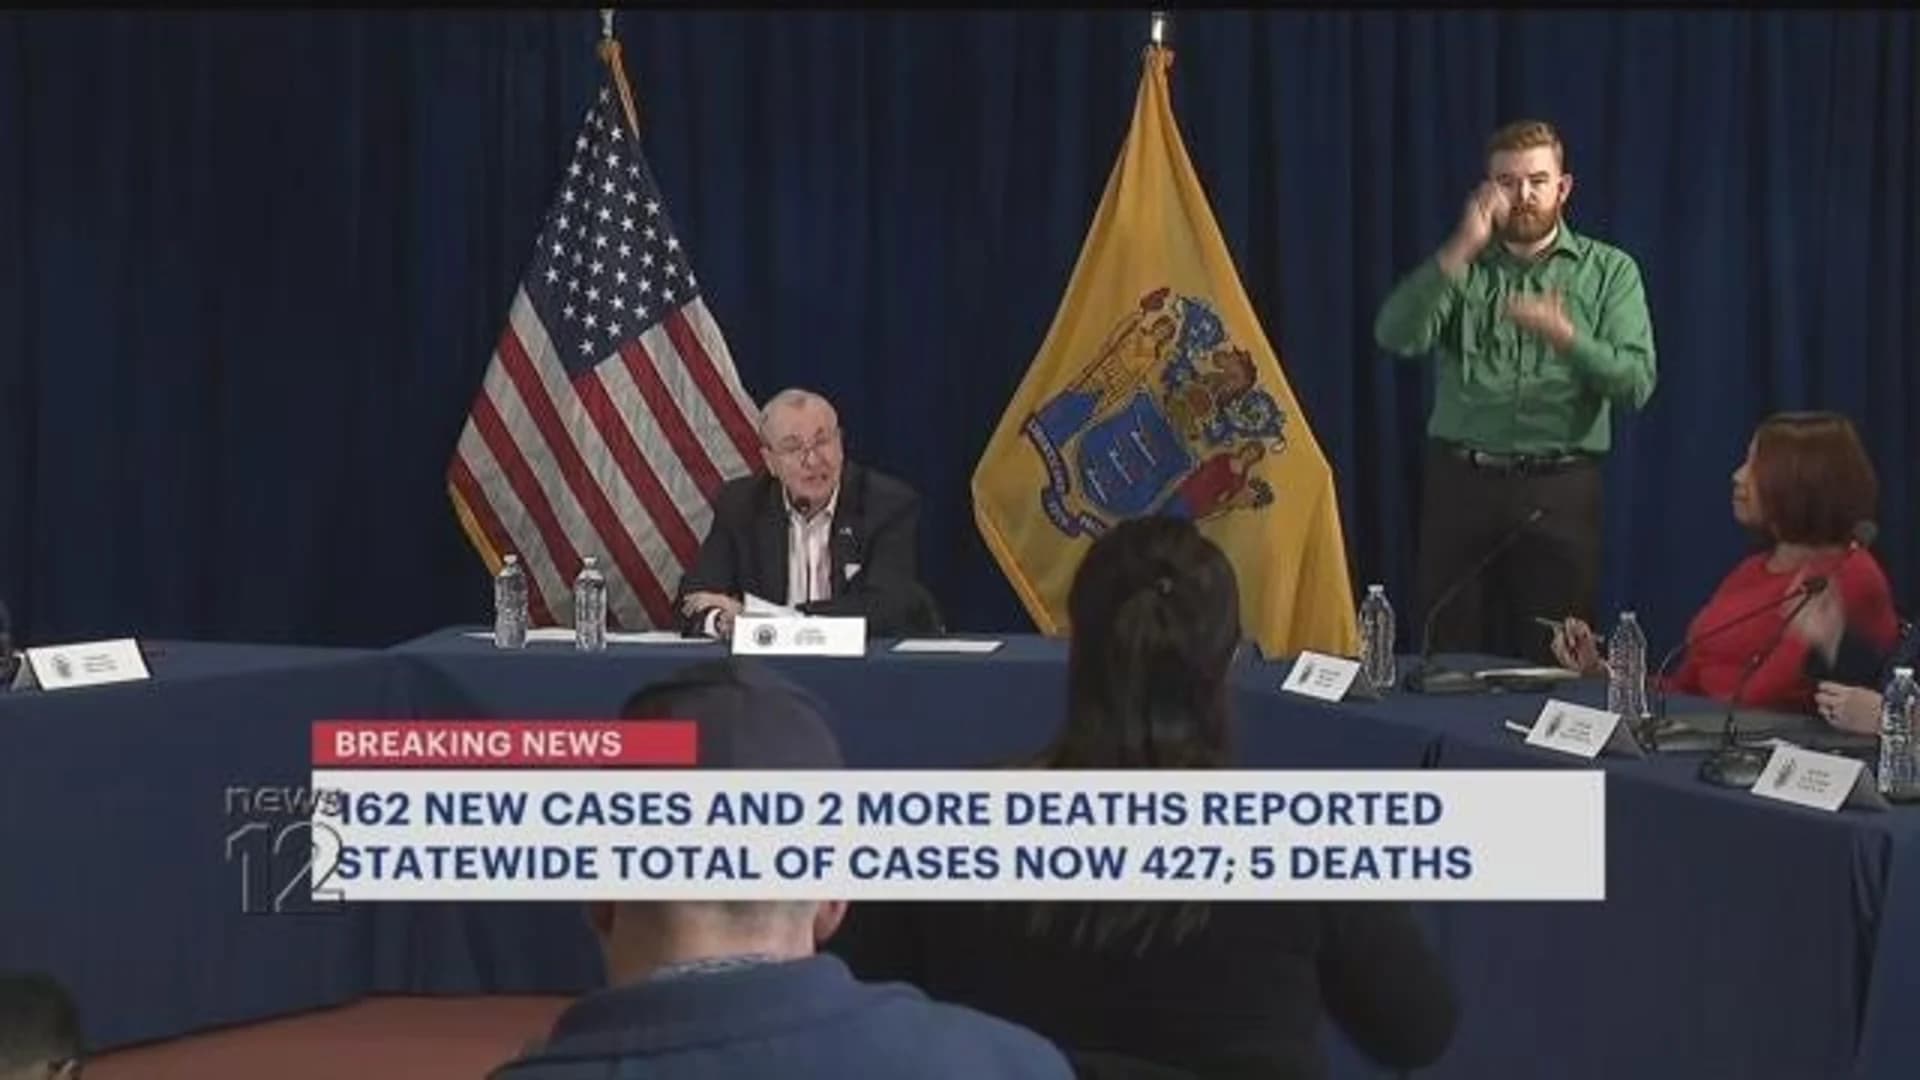 WATCH LIVE: State officials provide update on coronavirus outbreak